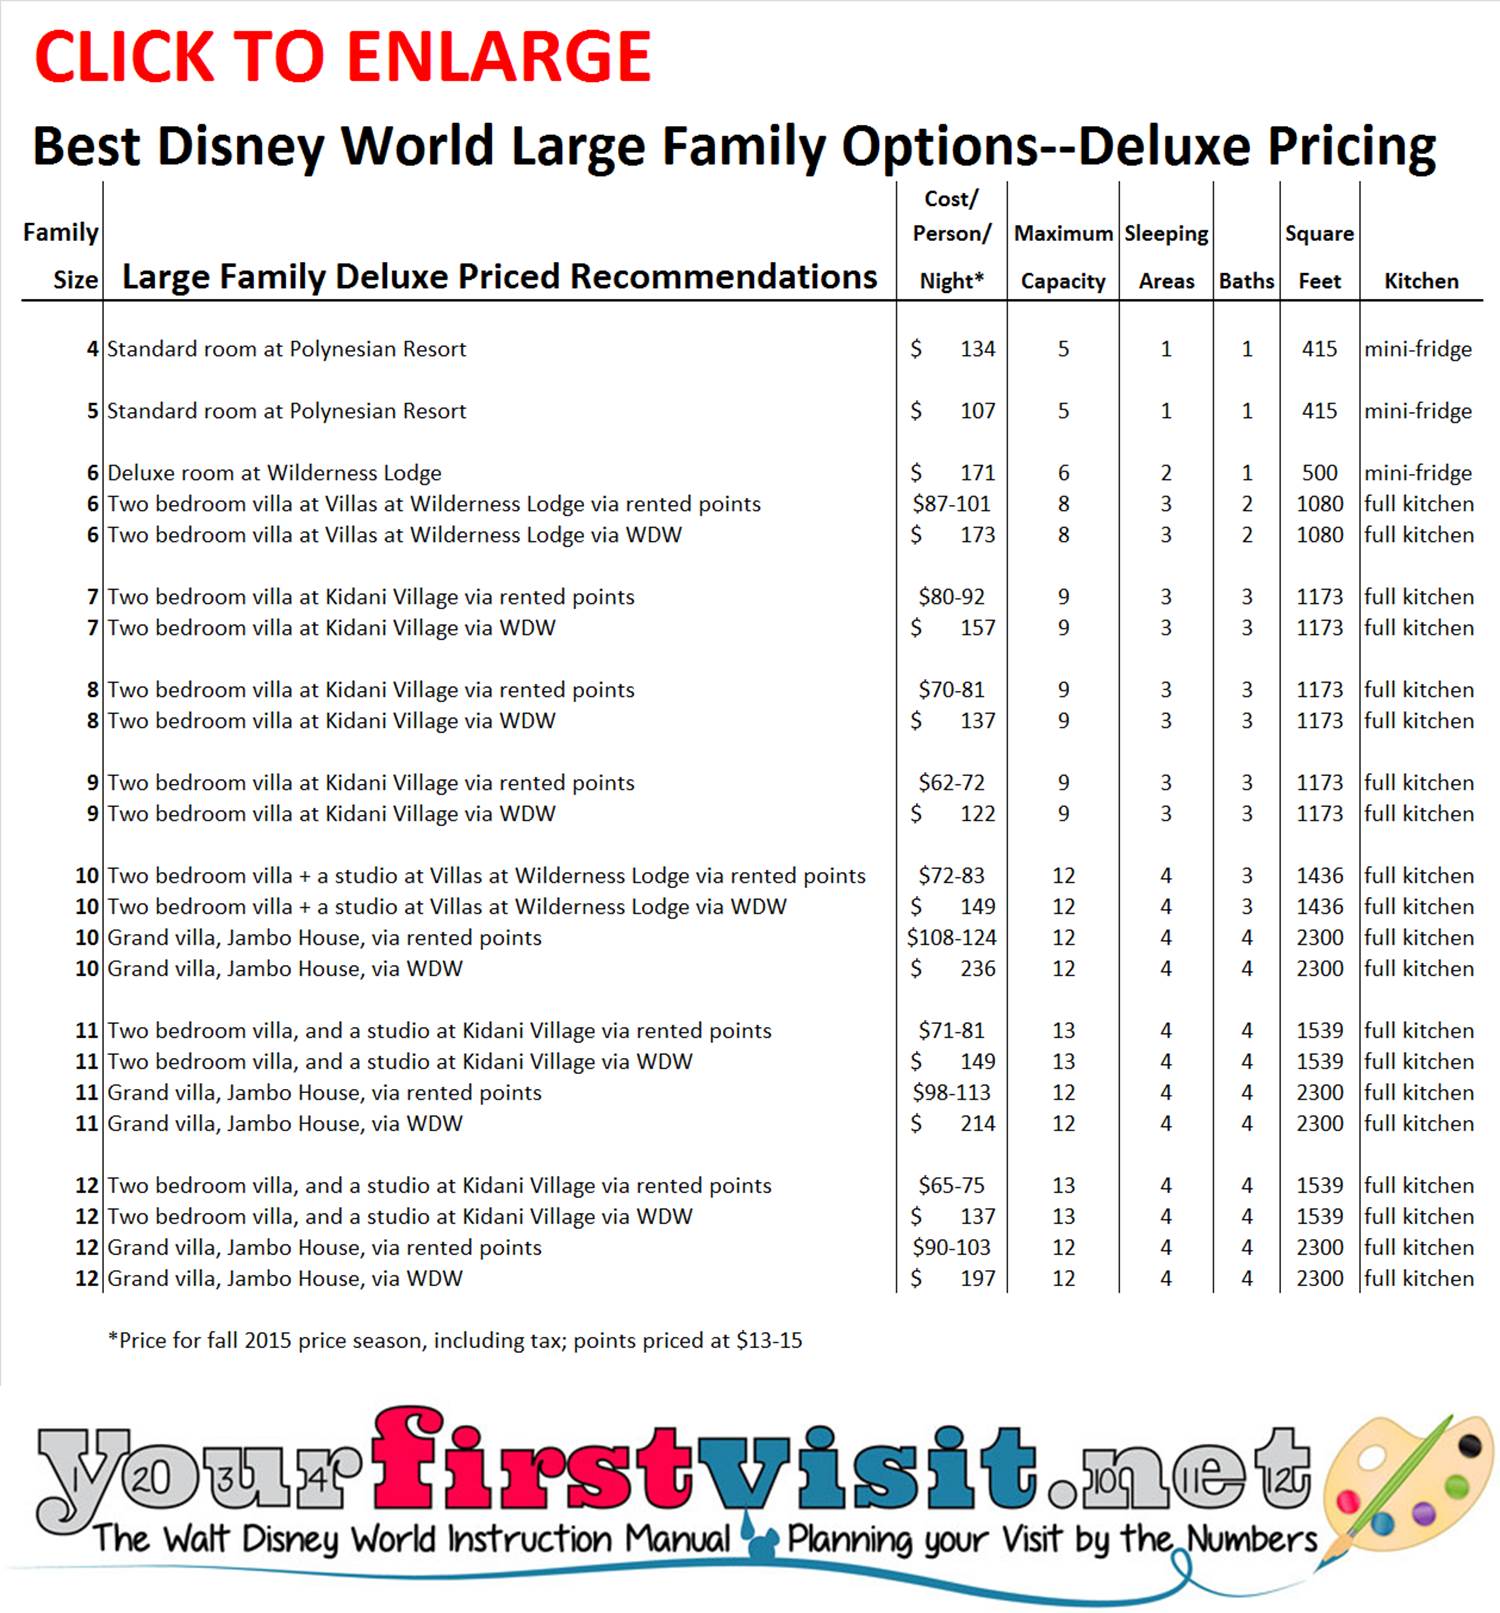 Disney World Deluxe Large Family Recommendations from yourfirstvisit.net